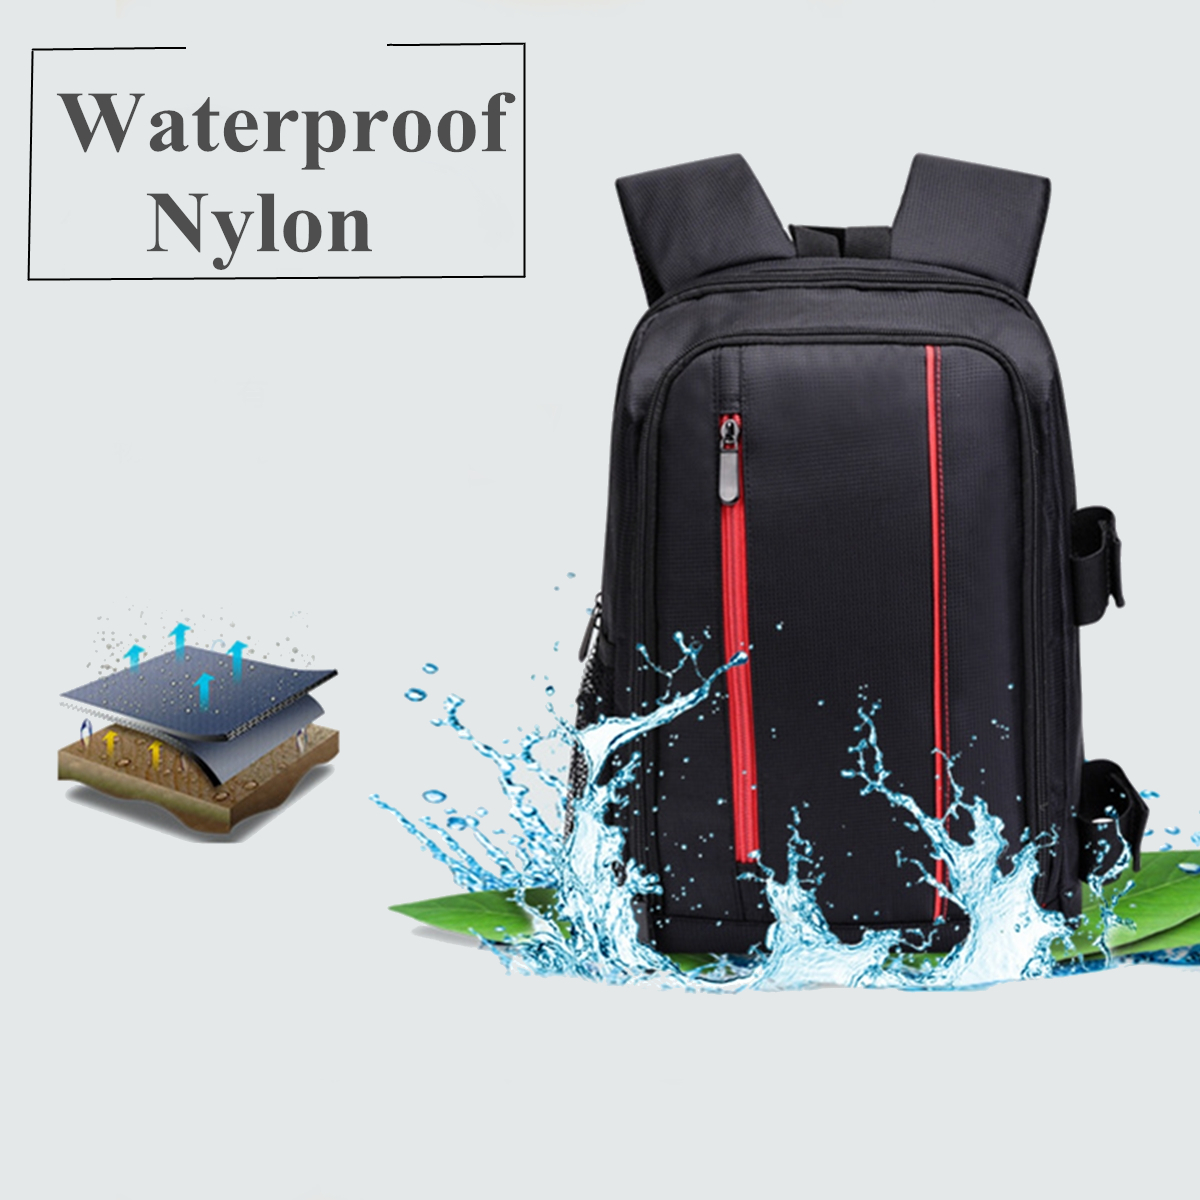 Waterproof Camera Backpack Travel DSLR Bag W/ Rain Cover For Canon Sony 10